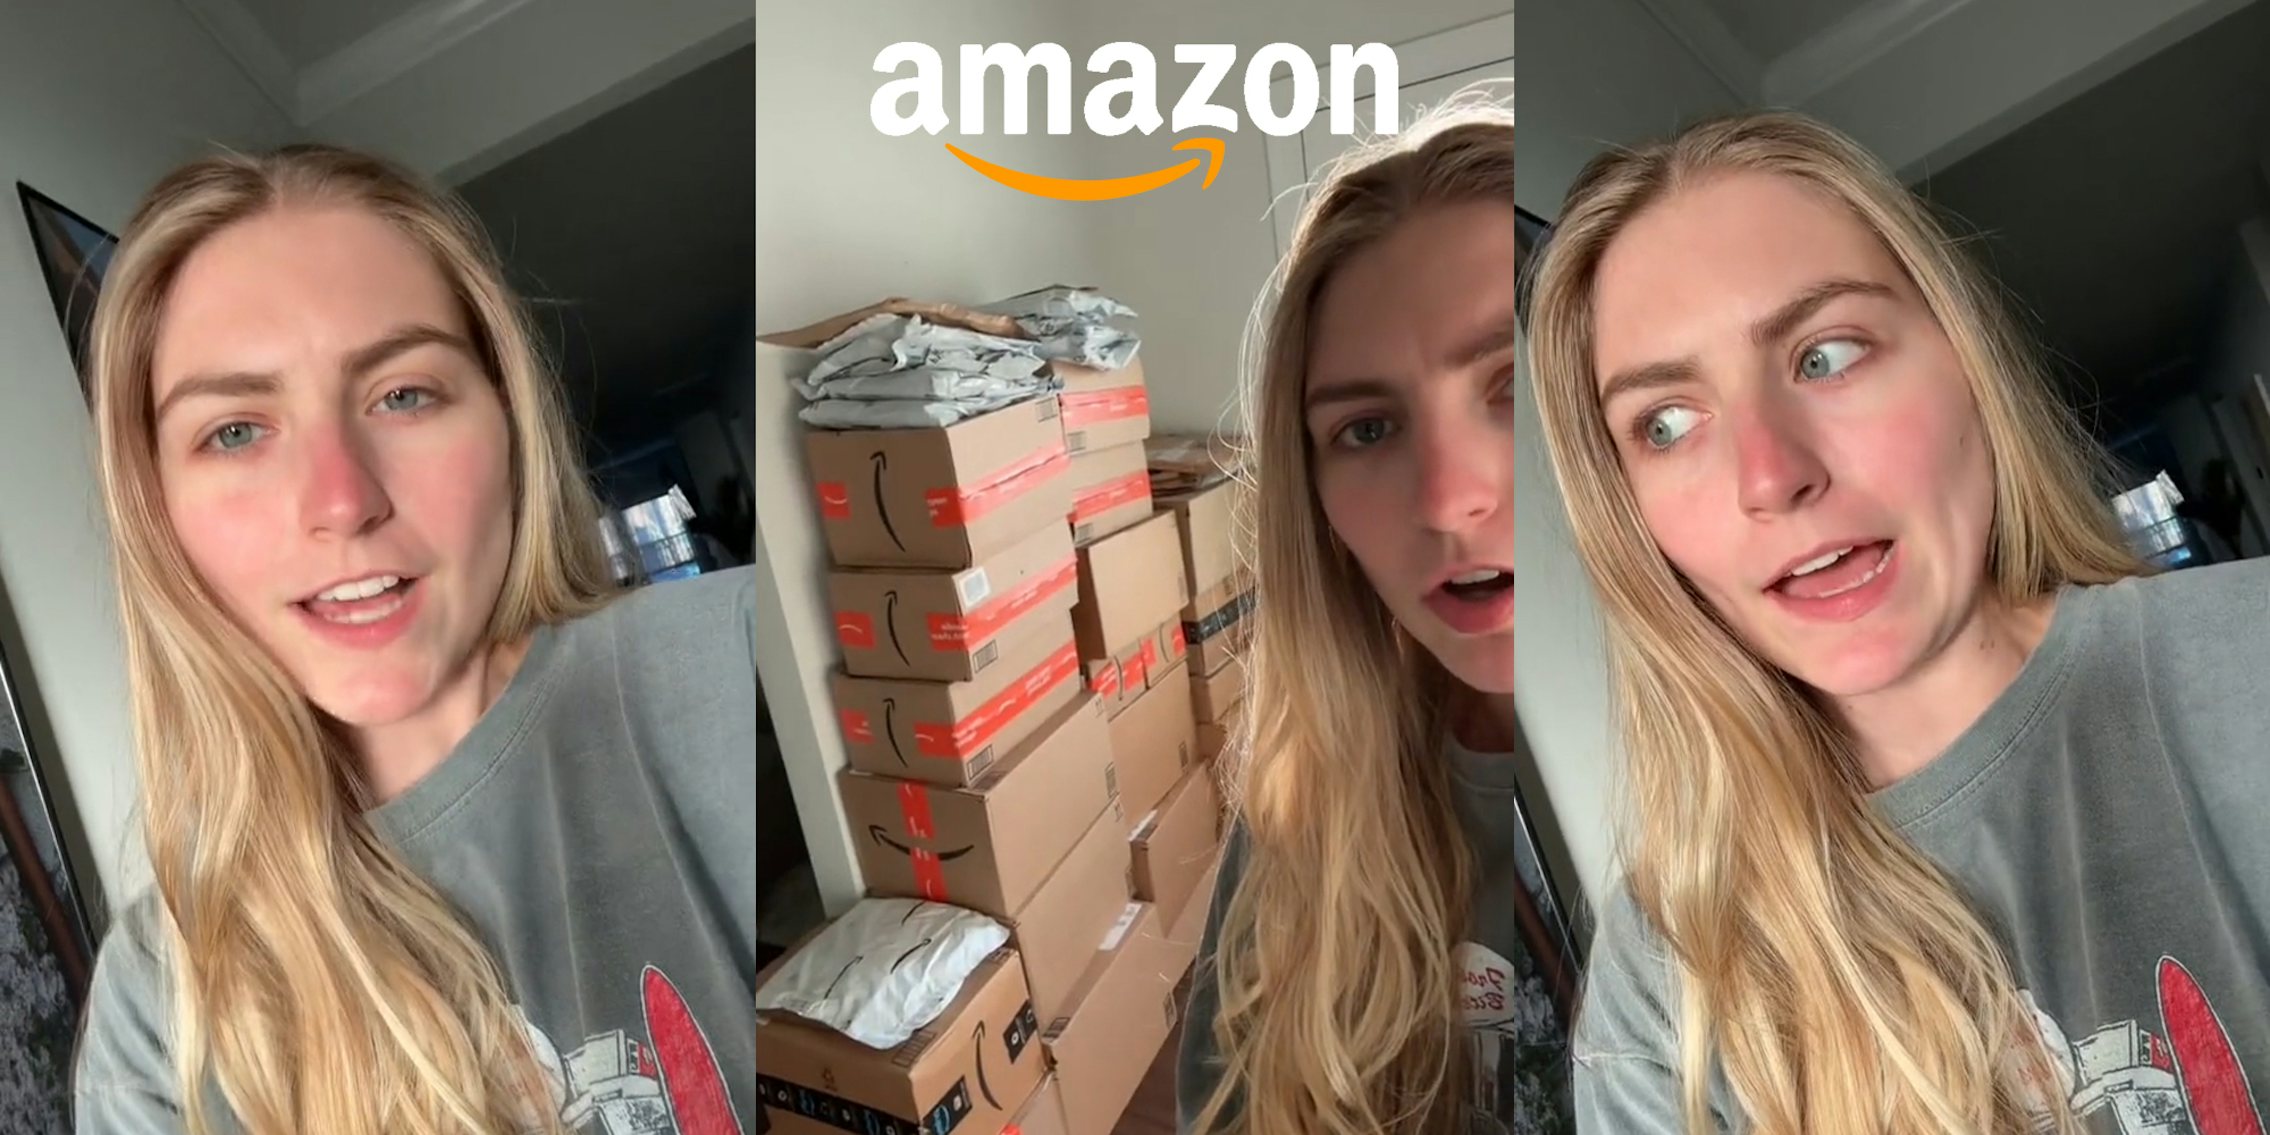 woman speaking in front of gray walls (l) woman speaking next to Amazon packages stacked at wall with Amazon logo above (c) woman speaking in front of gray walls (r)